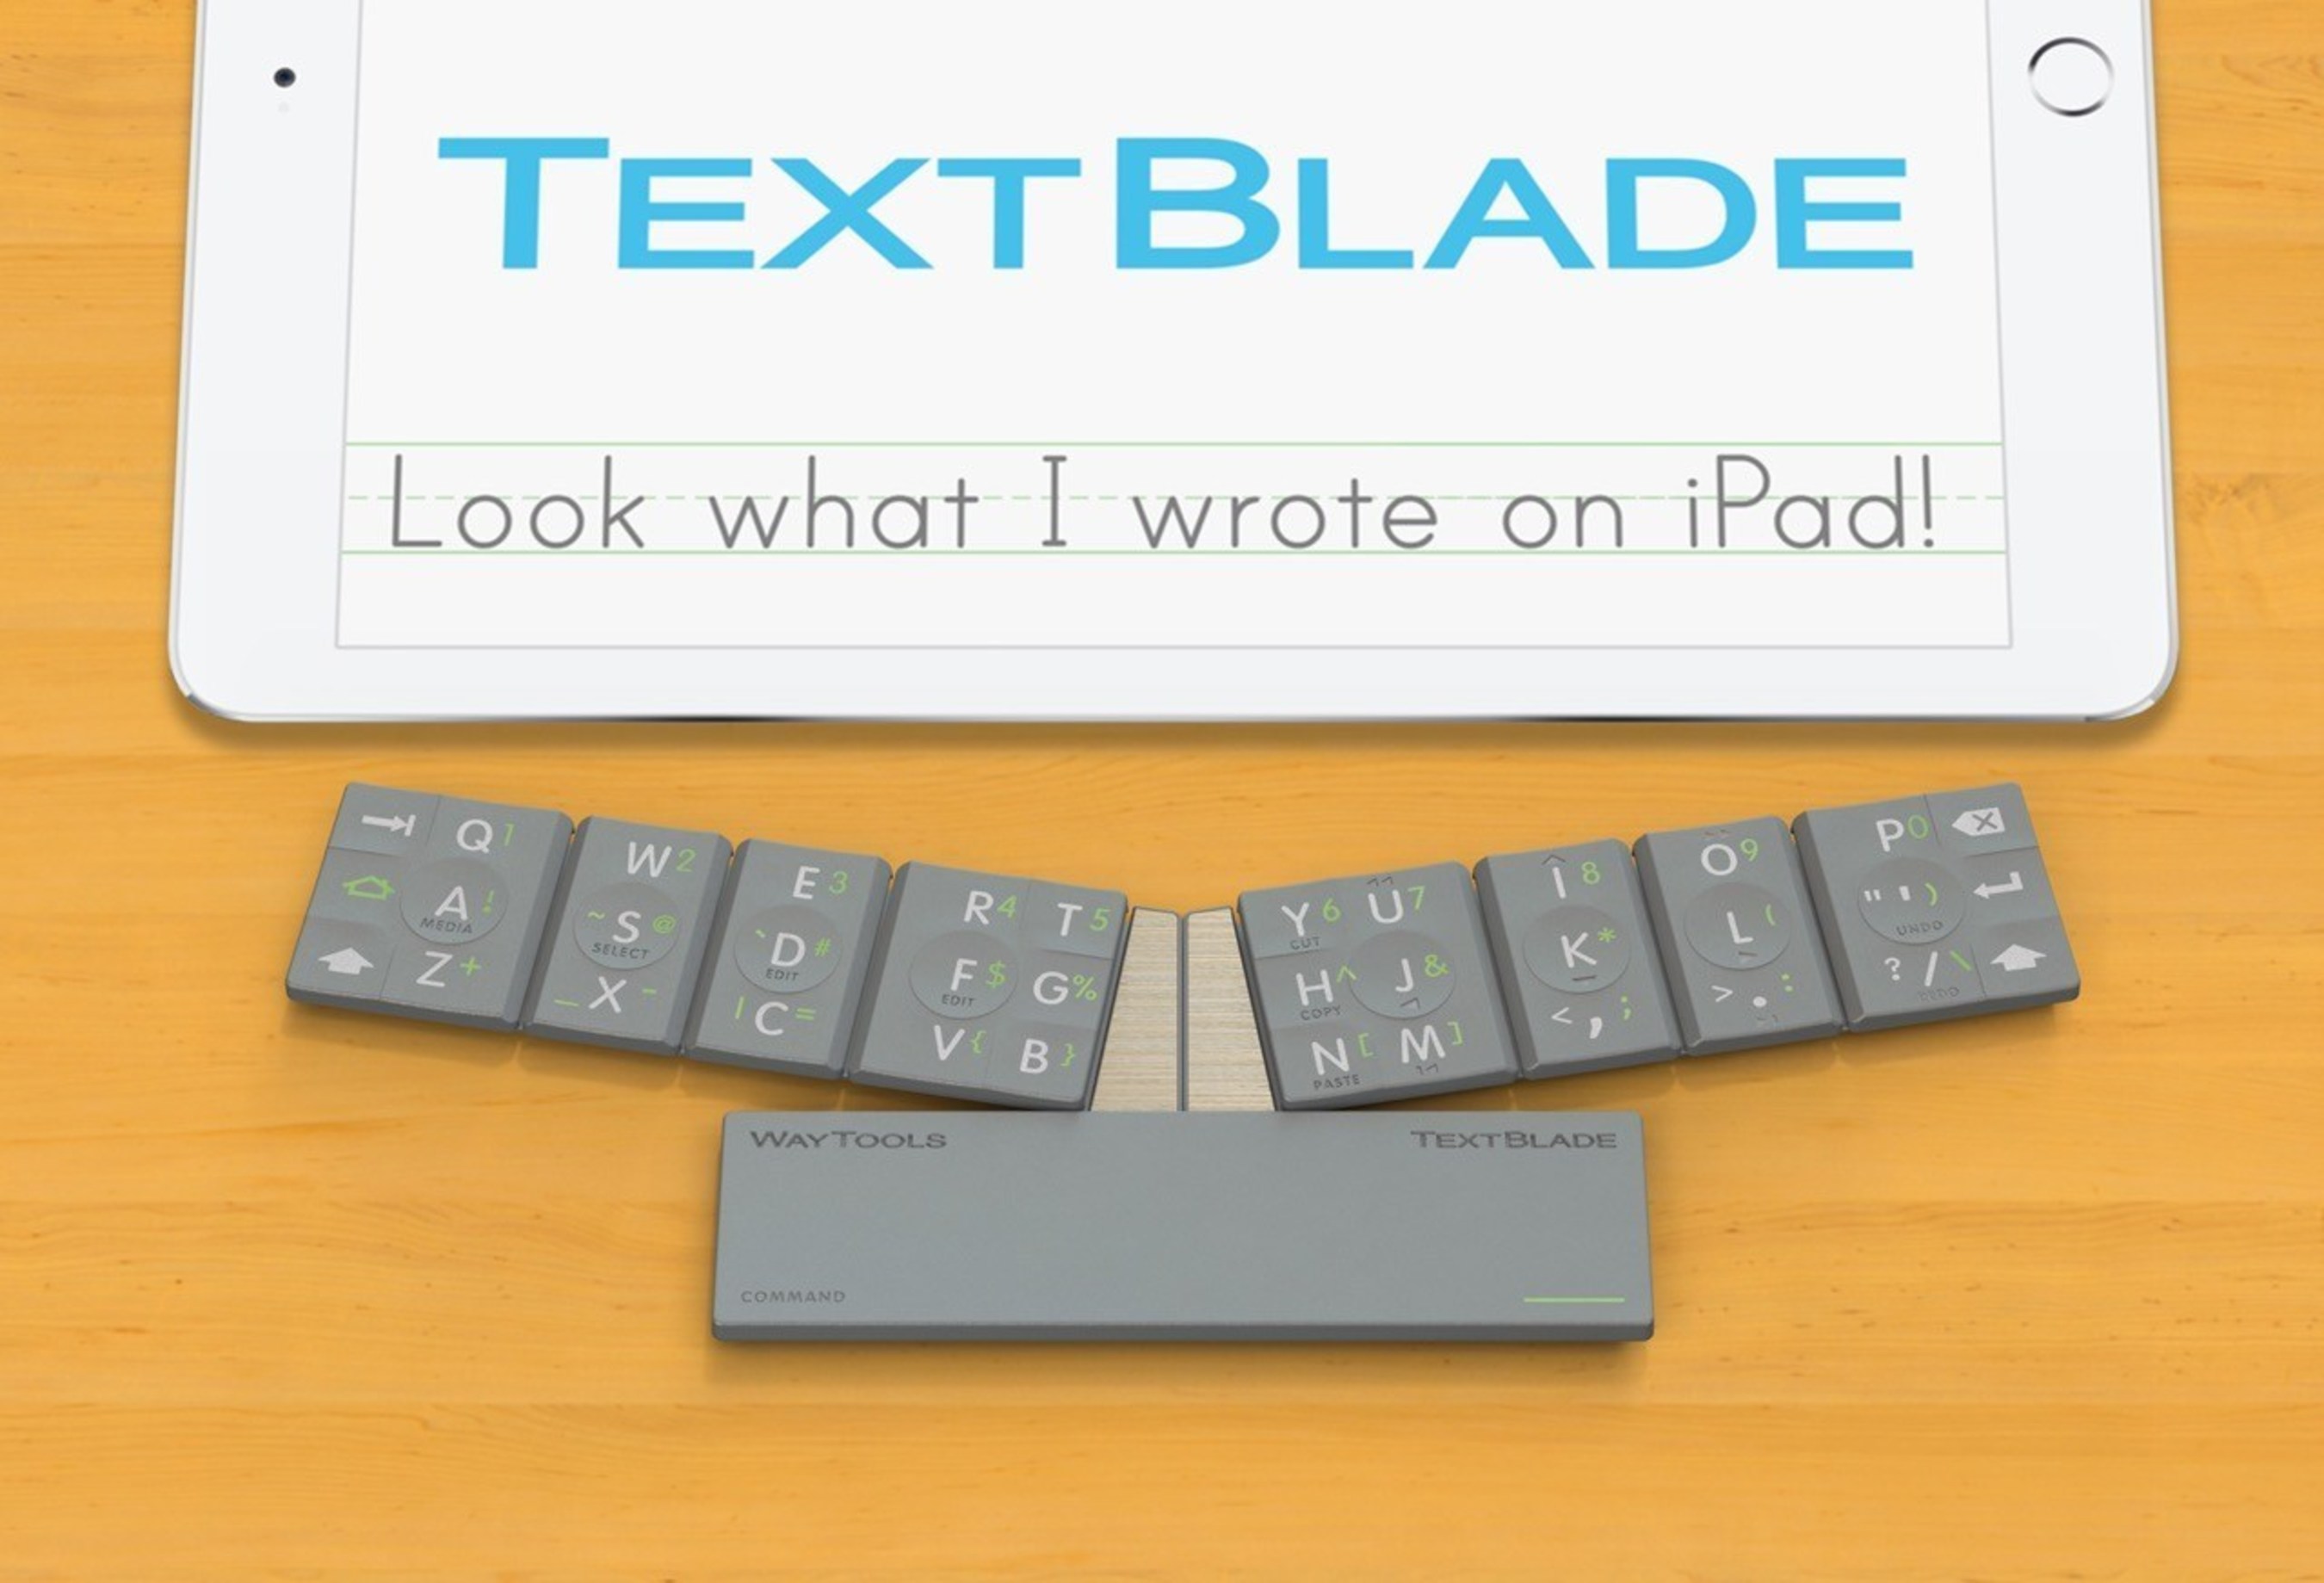 TextBlade.  Now, iPads Get Keys. iPads are magical learning machines, but kids also need real keys to write proficiently.  TextBlade brings state-of-the-art typing to iPad, while preserving all of its simplicity and fun.